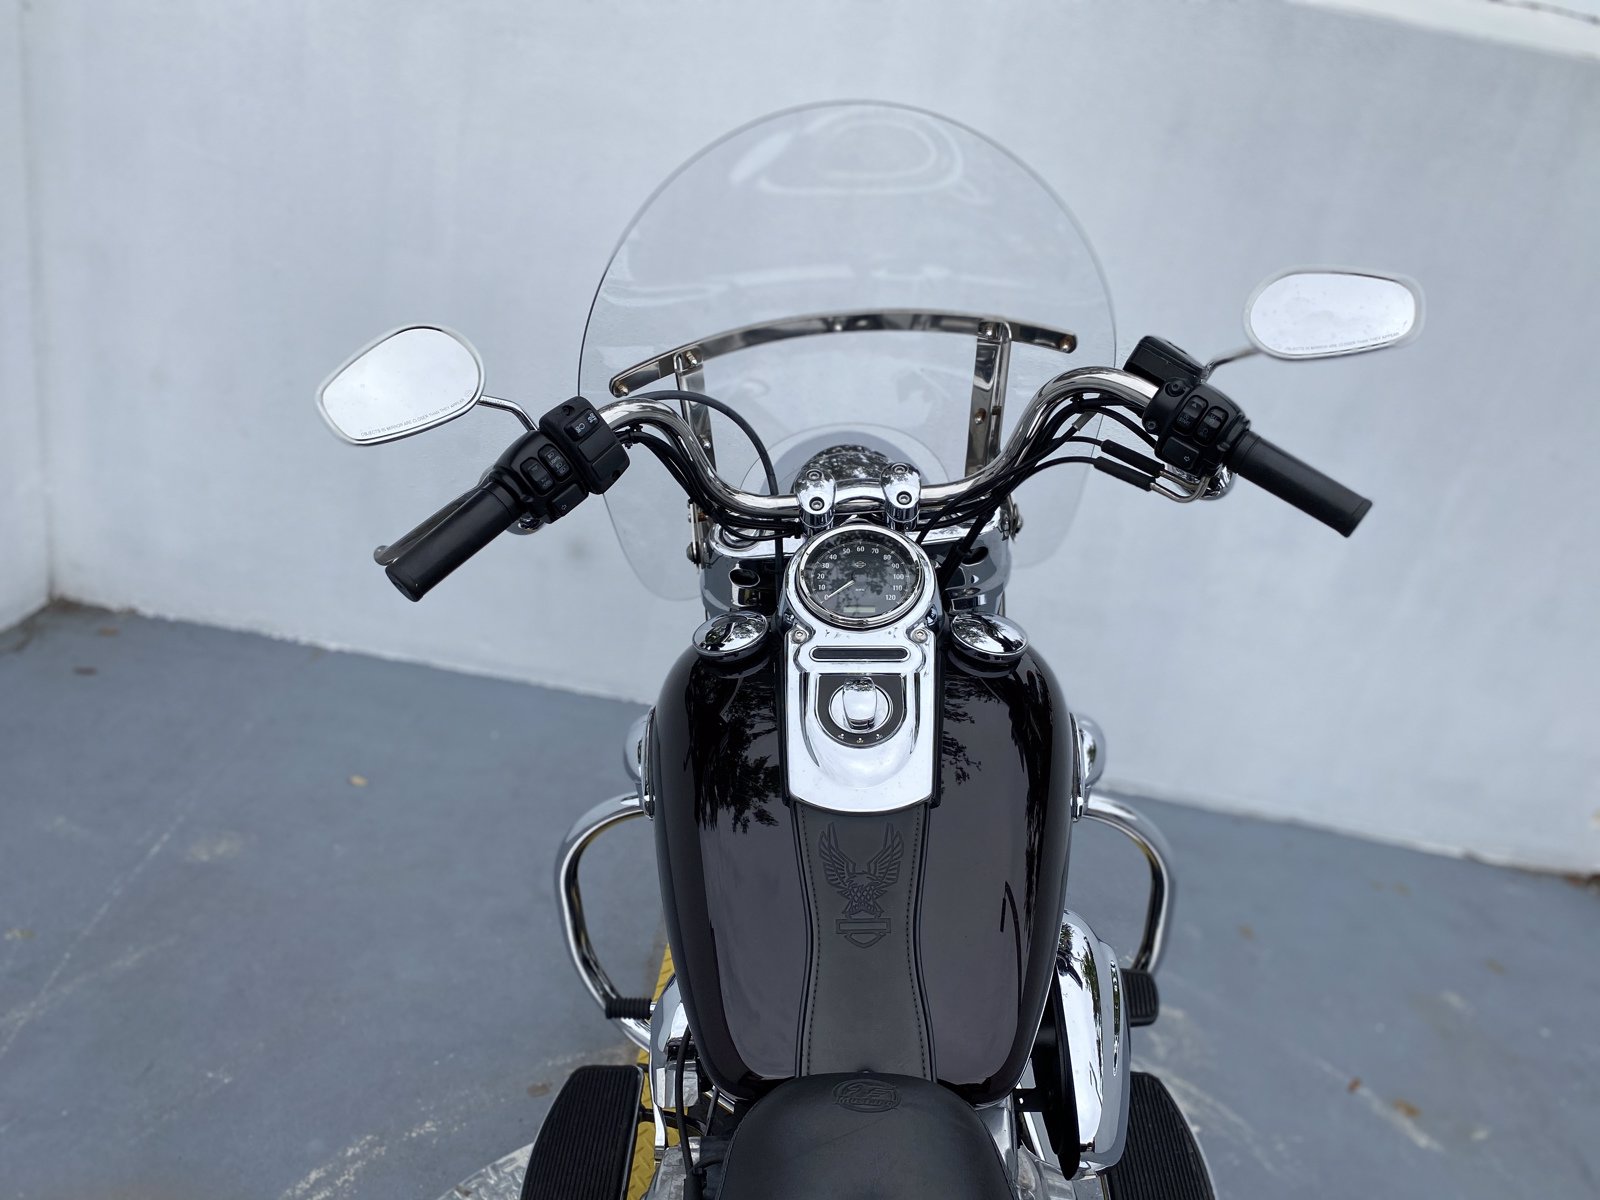 Pre-Owned 2014 Harley-Davidson Dyna Switchback FLD Dyna in West Palm